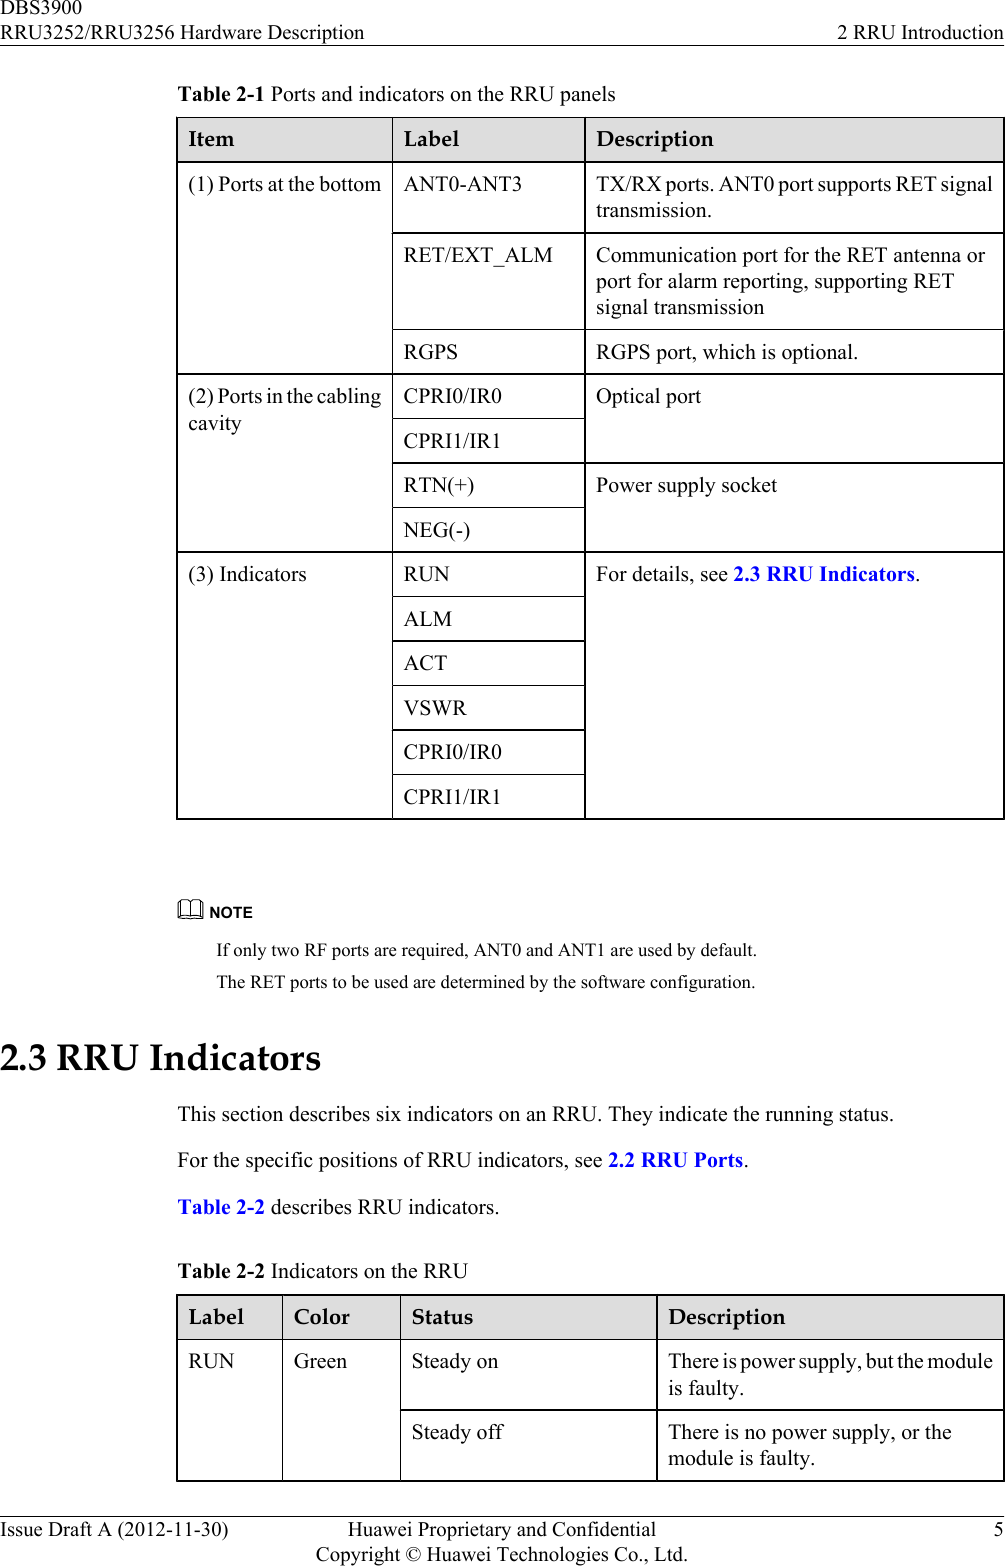 Table 2-1 Ports and indicators on the RRU panelsItem Label Description(1) Ports at the bottom ANT0-ANT3 TX/RX ports. ANT0 port supports RET signaltransmission.RET/EXT_ALM Communication port for the RET antenna orport for alarm reporting, supporting RETsignal transmissionRGPS RGPS port, which is optional.(2) Ports in the cablingcavityCPRI0/IR0 Optical portCPRI1/IR1RTN(+) Power supply socketNEG(-)(3) Indicators RUN For details, see 2.3 RRU Indicators.ALMACTVSWRCPRI0/IR0CPRI1/IR1 NOTEIf only two RF ports are required, ANT0 and ANT1 are used by default.The RET ports to be used are determined by the software configuration.2.3 RRU IndicatorsThis section describes six indicators on an RRU. They indicate the running status.For the specific positions of RRU indicators, see 2.2 RRU Ports.Table 2-2 describes RRU indicators.Table 2-2 Indicators on the RRULabel Color Status DescriptionRUN Green Steady on There is power supply, but the moduleis faulty.Steady off There is no power supply, or themodule is faulty.DBS3900RRU3252/RRU3256 Hardware Description 2 RRU IntroductionIssue Draft A (2012-11-30) Huawei Proprietary and ConfidentialCopyright © Huawei Technologies Co., Ltd.5